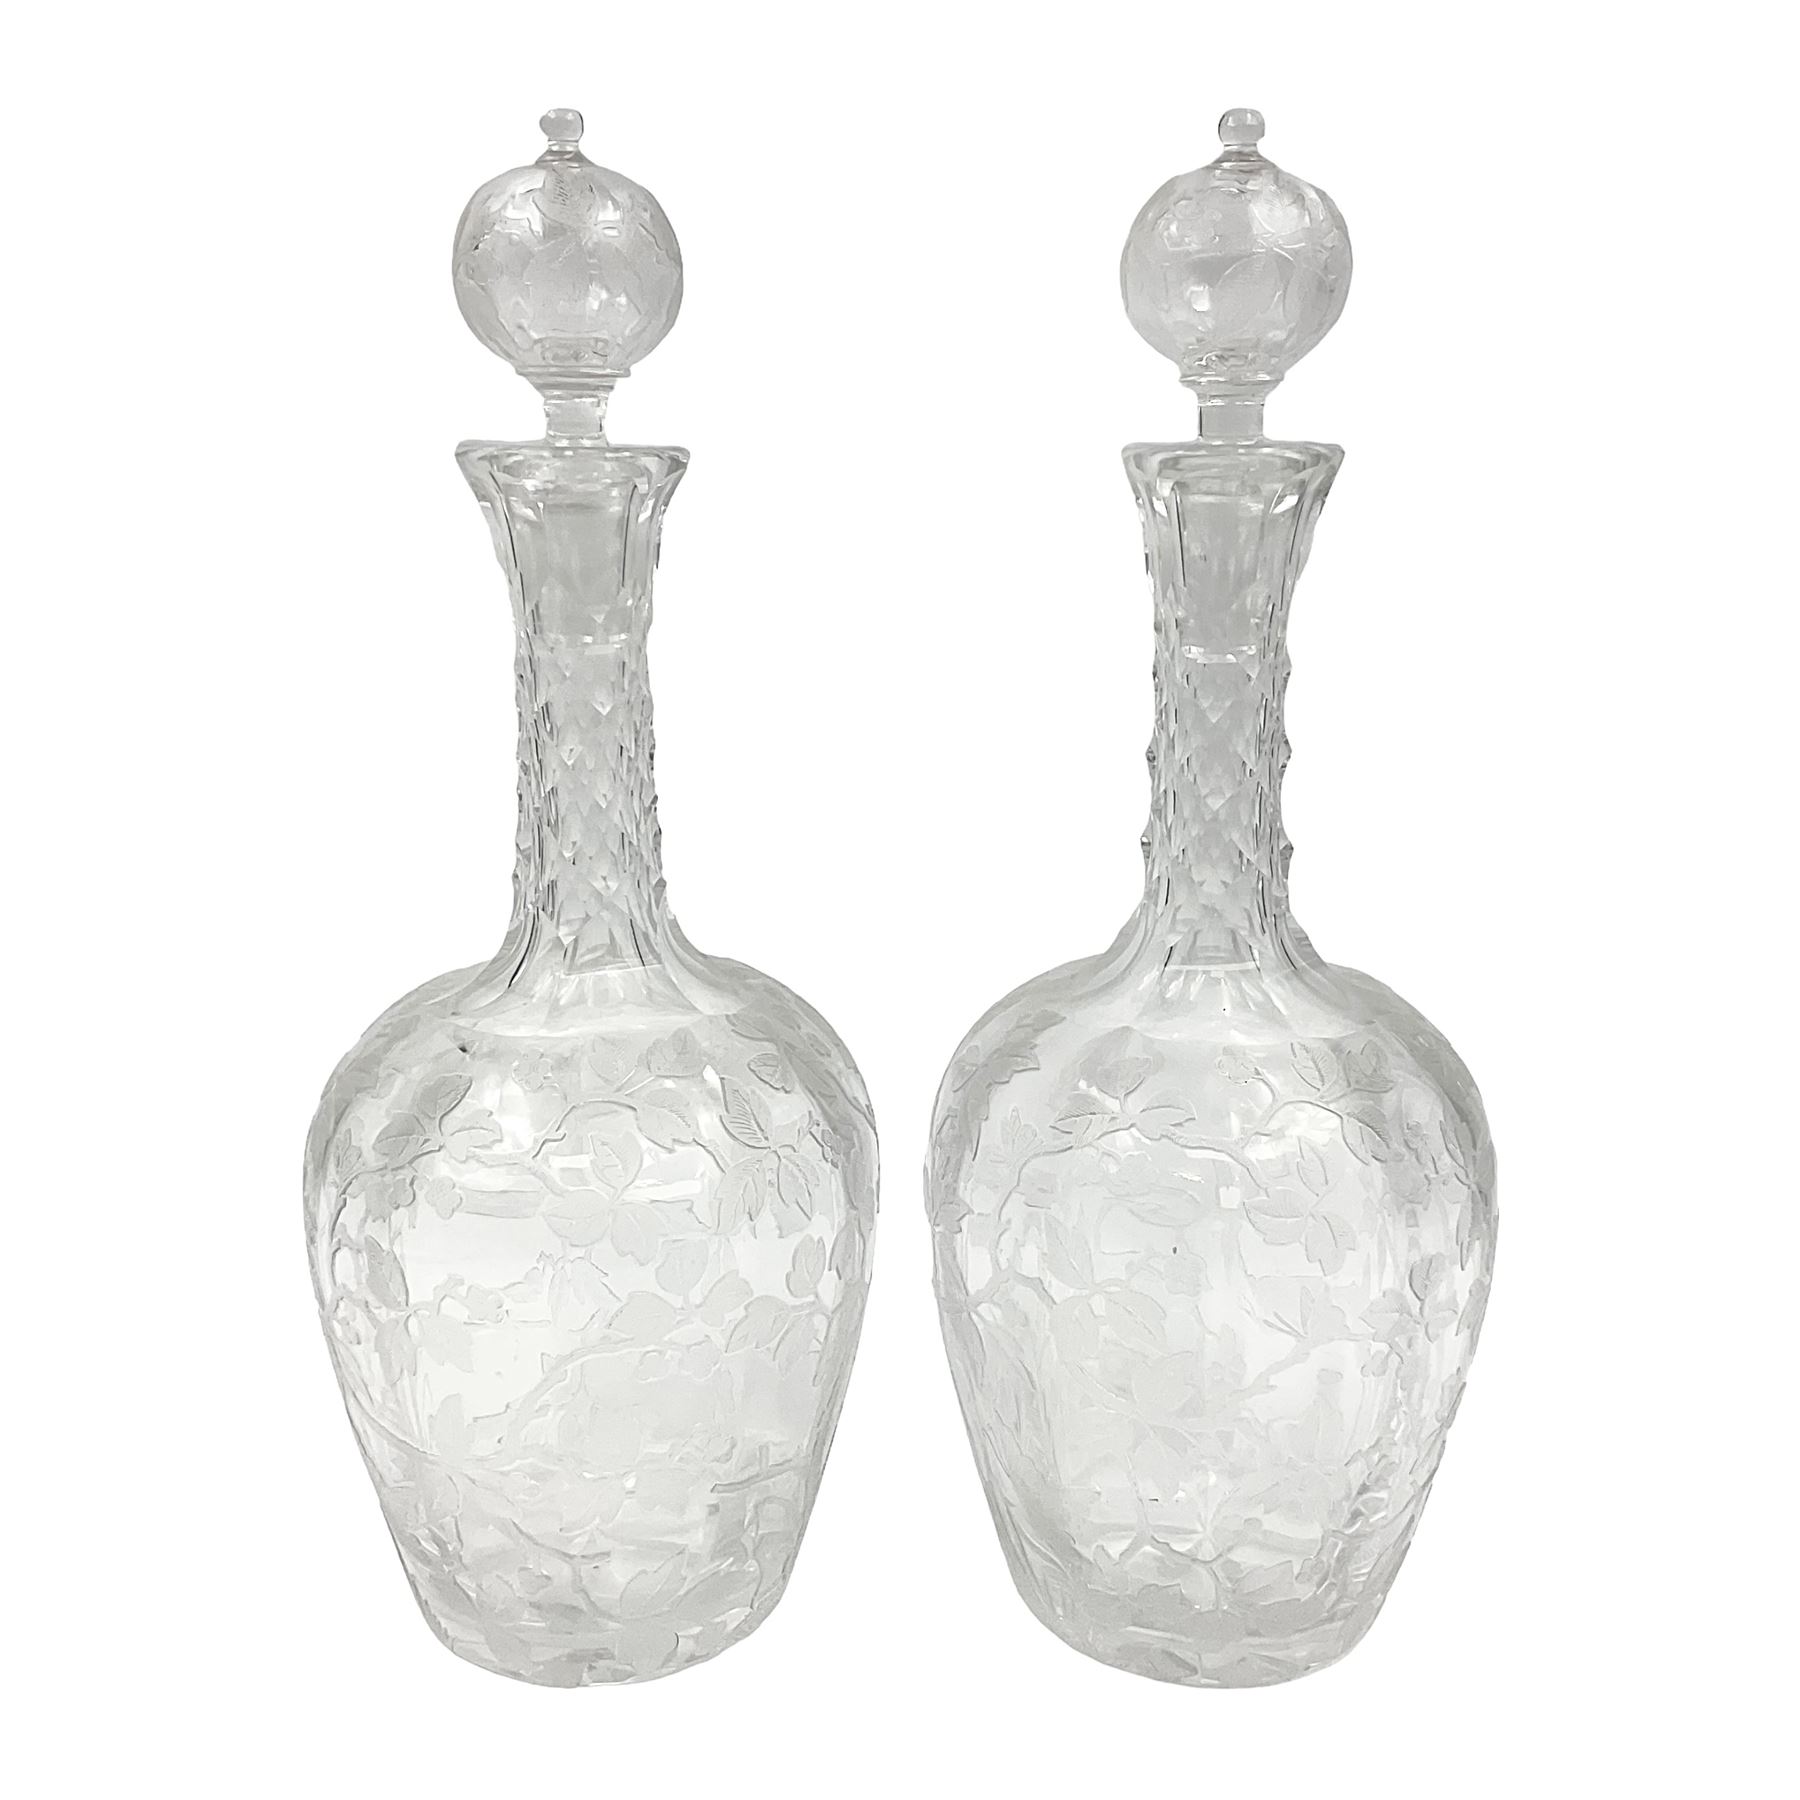 Pair of early 20th century cut glass decanters - Image 2 of 20